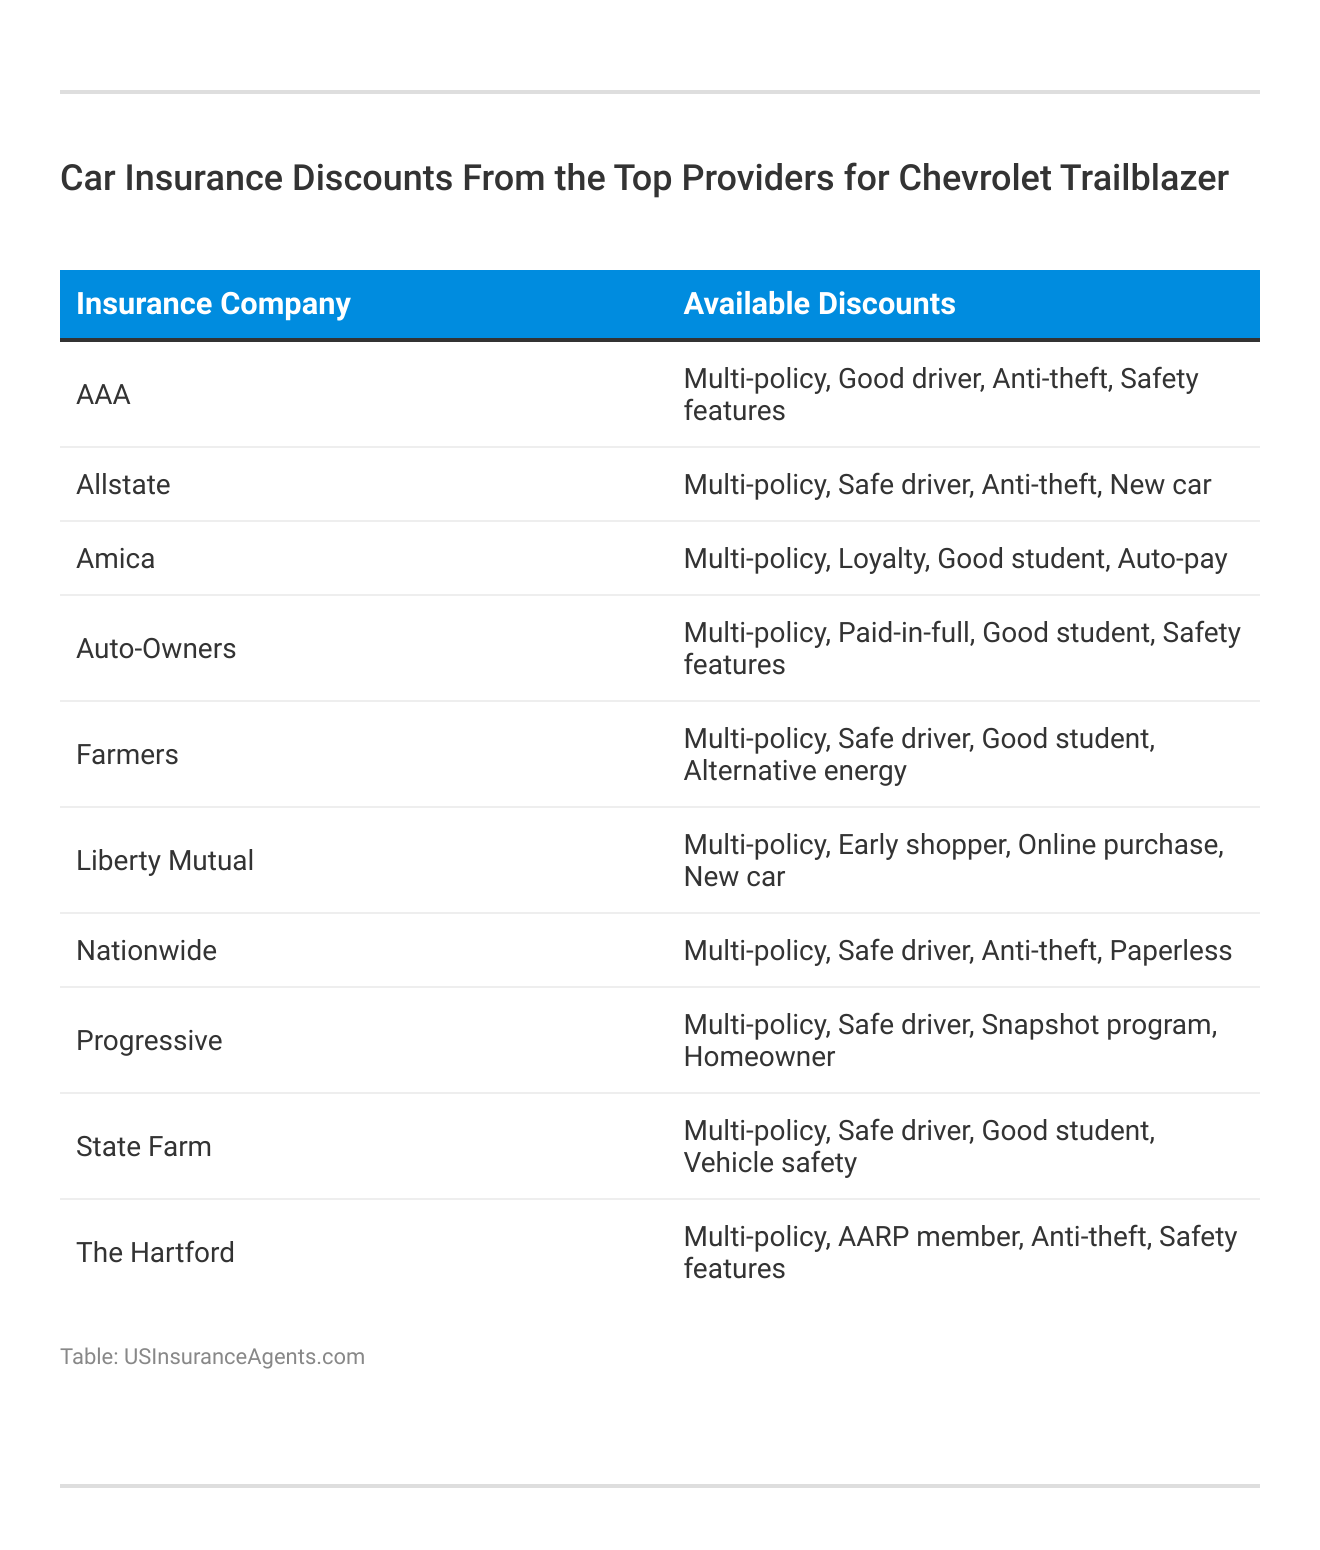 <h3>Car Insurance Discounts From the Top Providers for Chevrolet Trailblazer</h3>